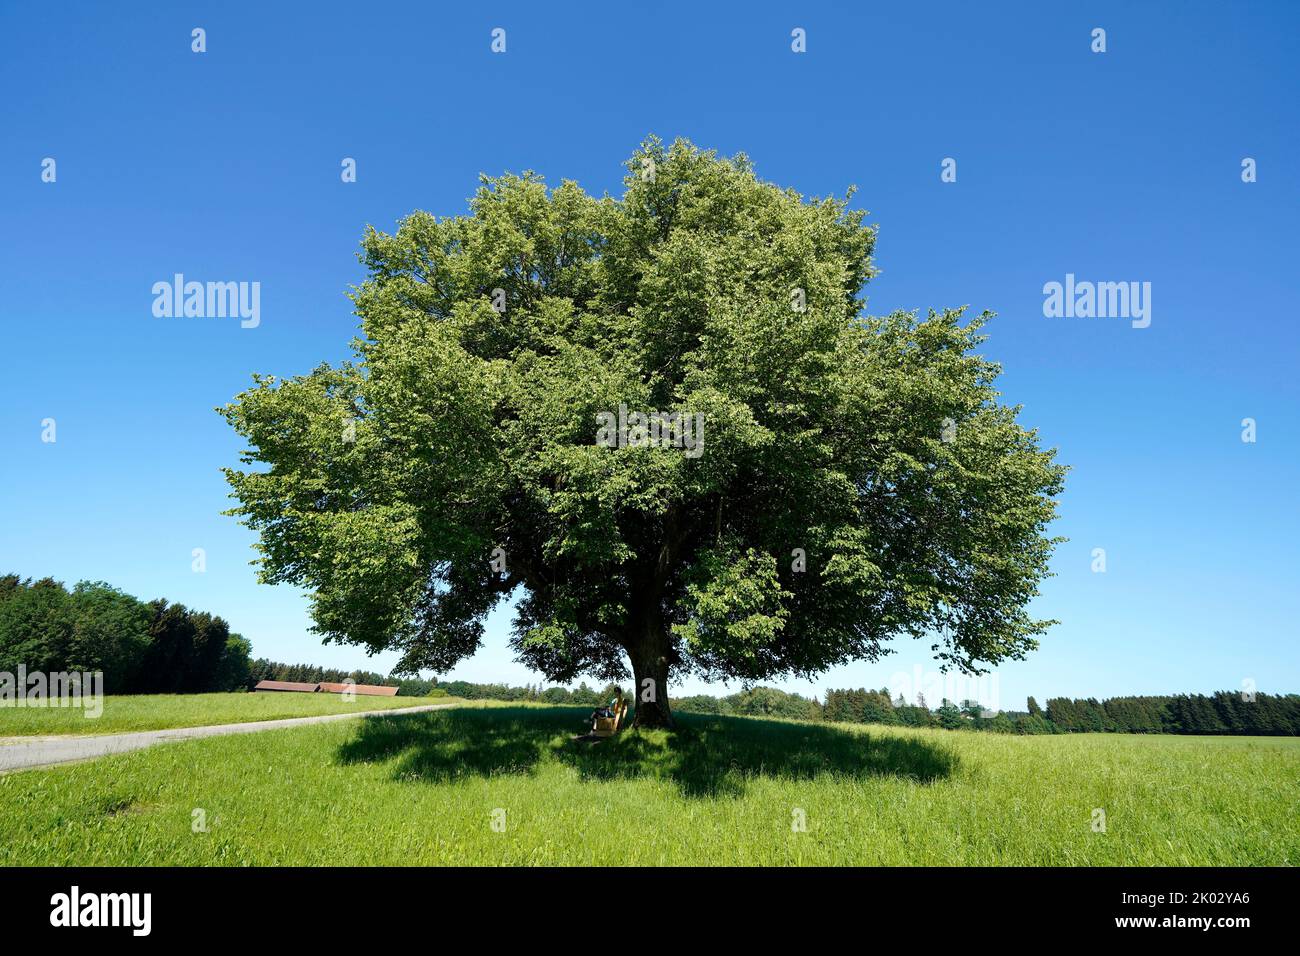 Germany, Bavaria, Upper Bavaria, Traunstein district, Waging am See, lime tree in a meadow, large-leaved lime tree, tilia platyphyllos, free standing Stock Photo